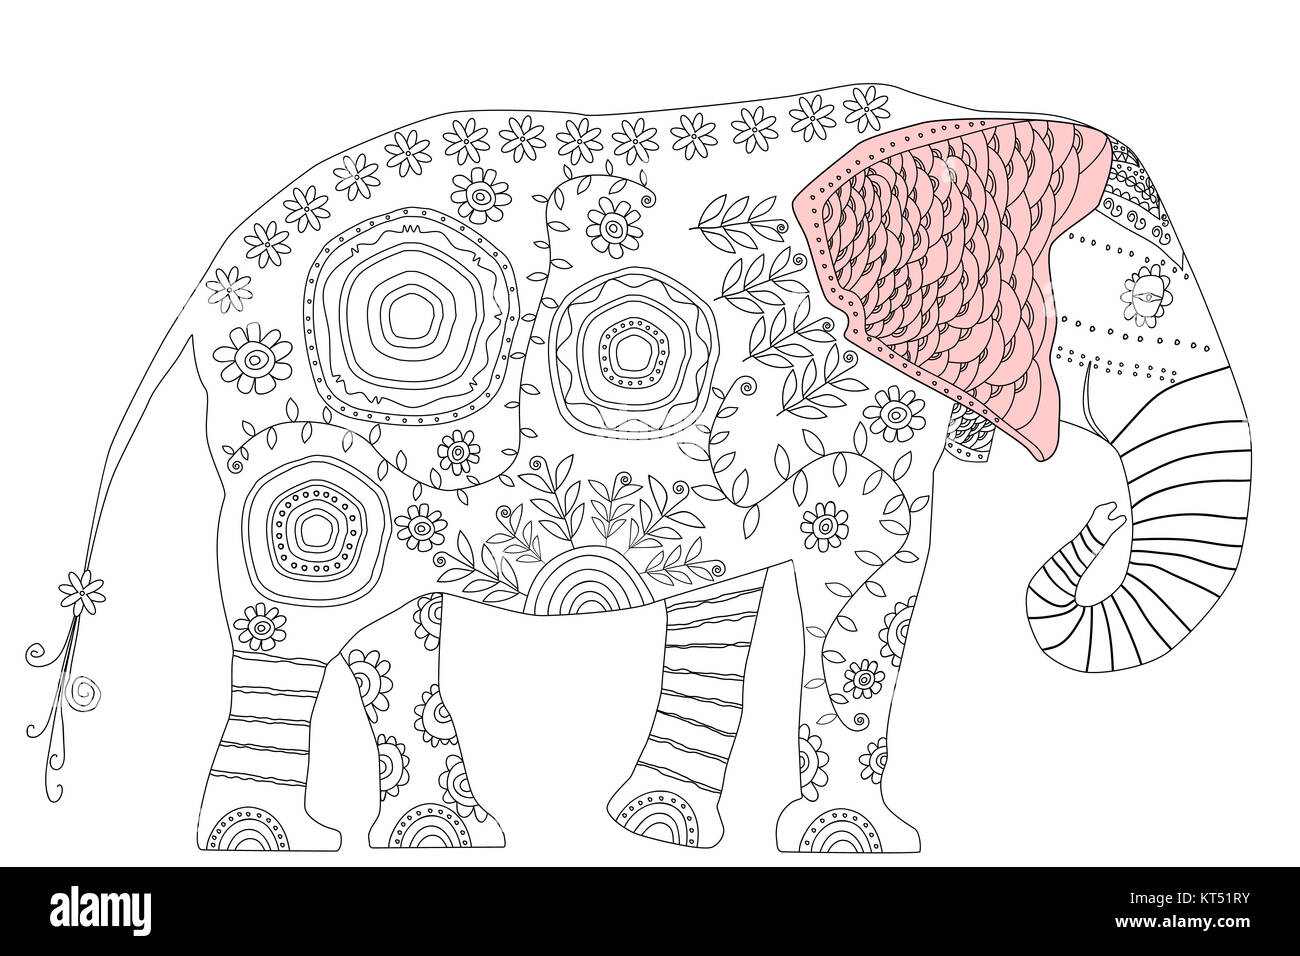 Black and white illustration for coloring book Stock Photo